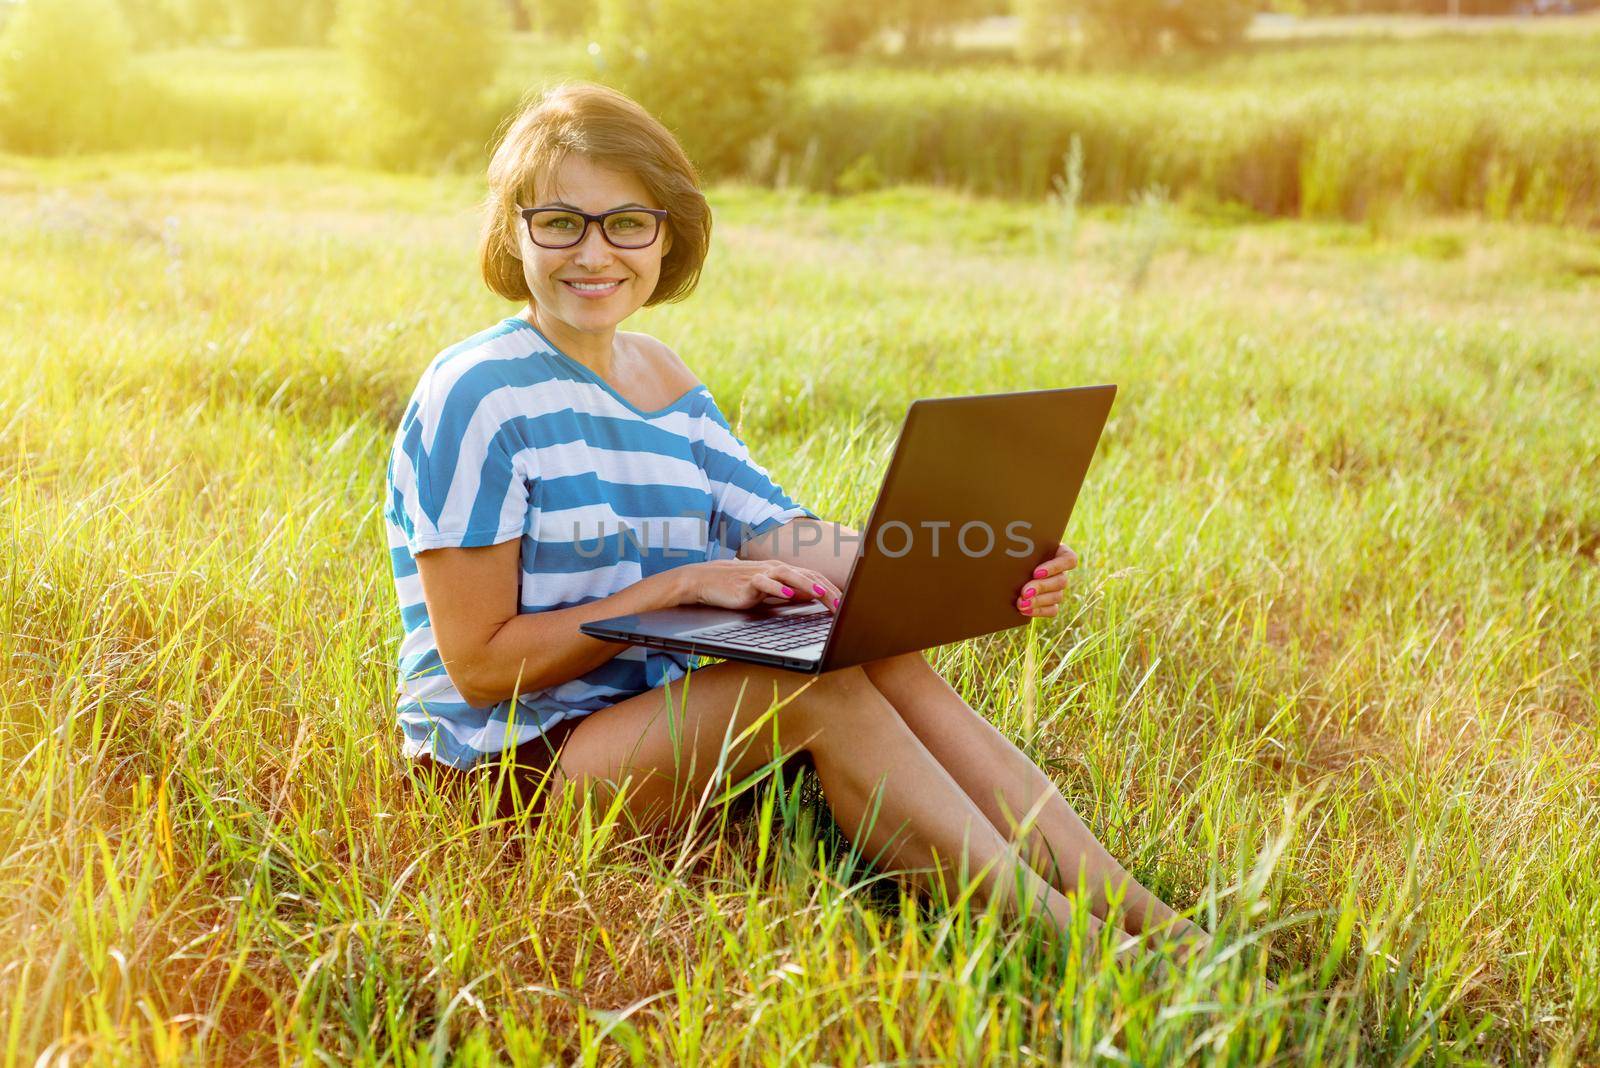 Beautiful woman with a laptop. Smiling at the camera. The picture was taken in the park.